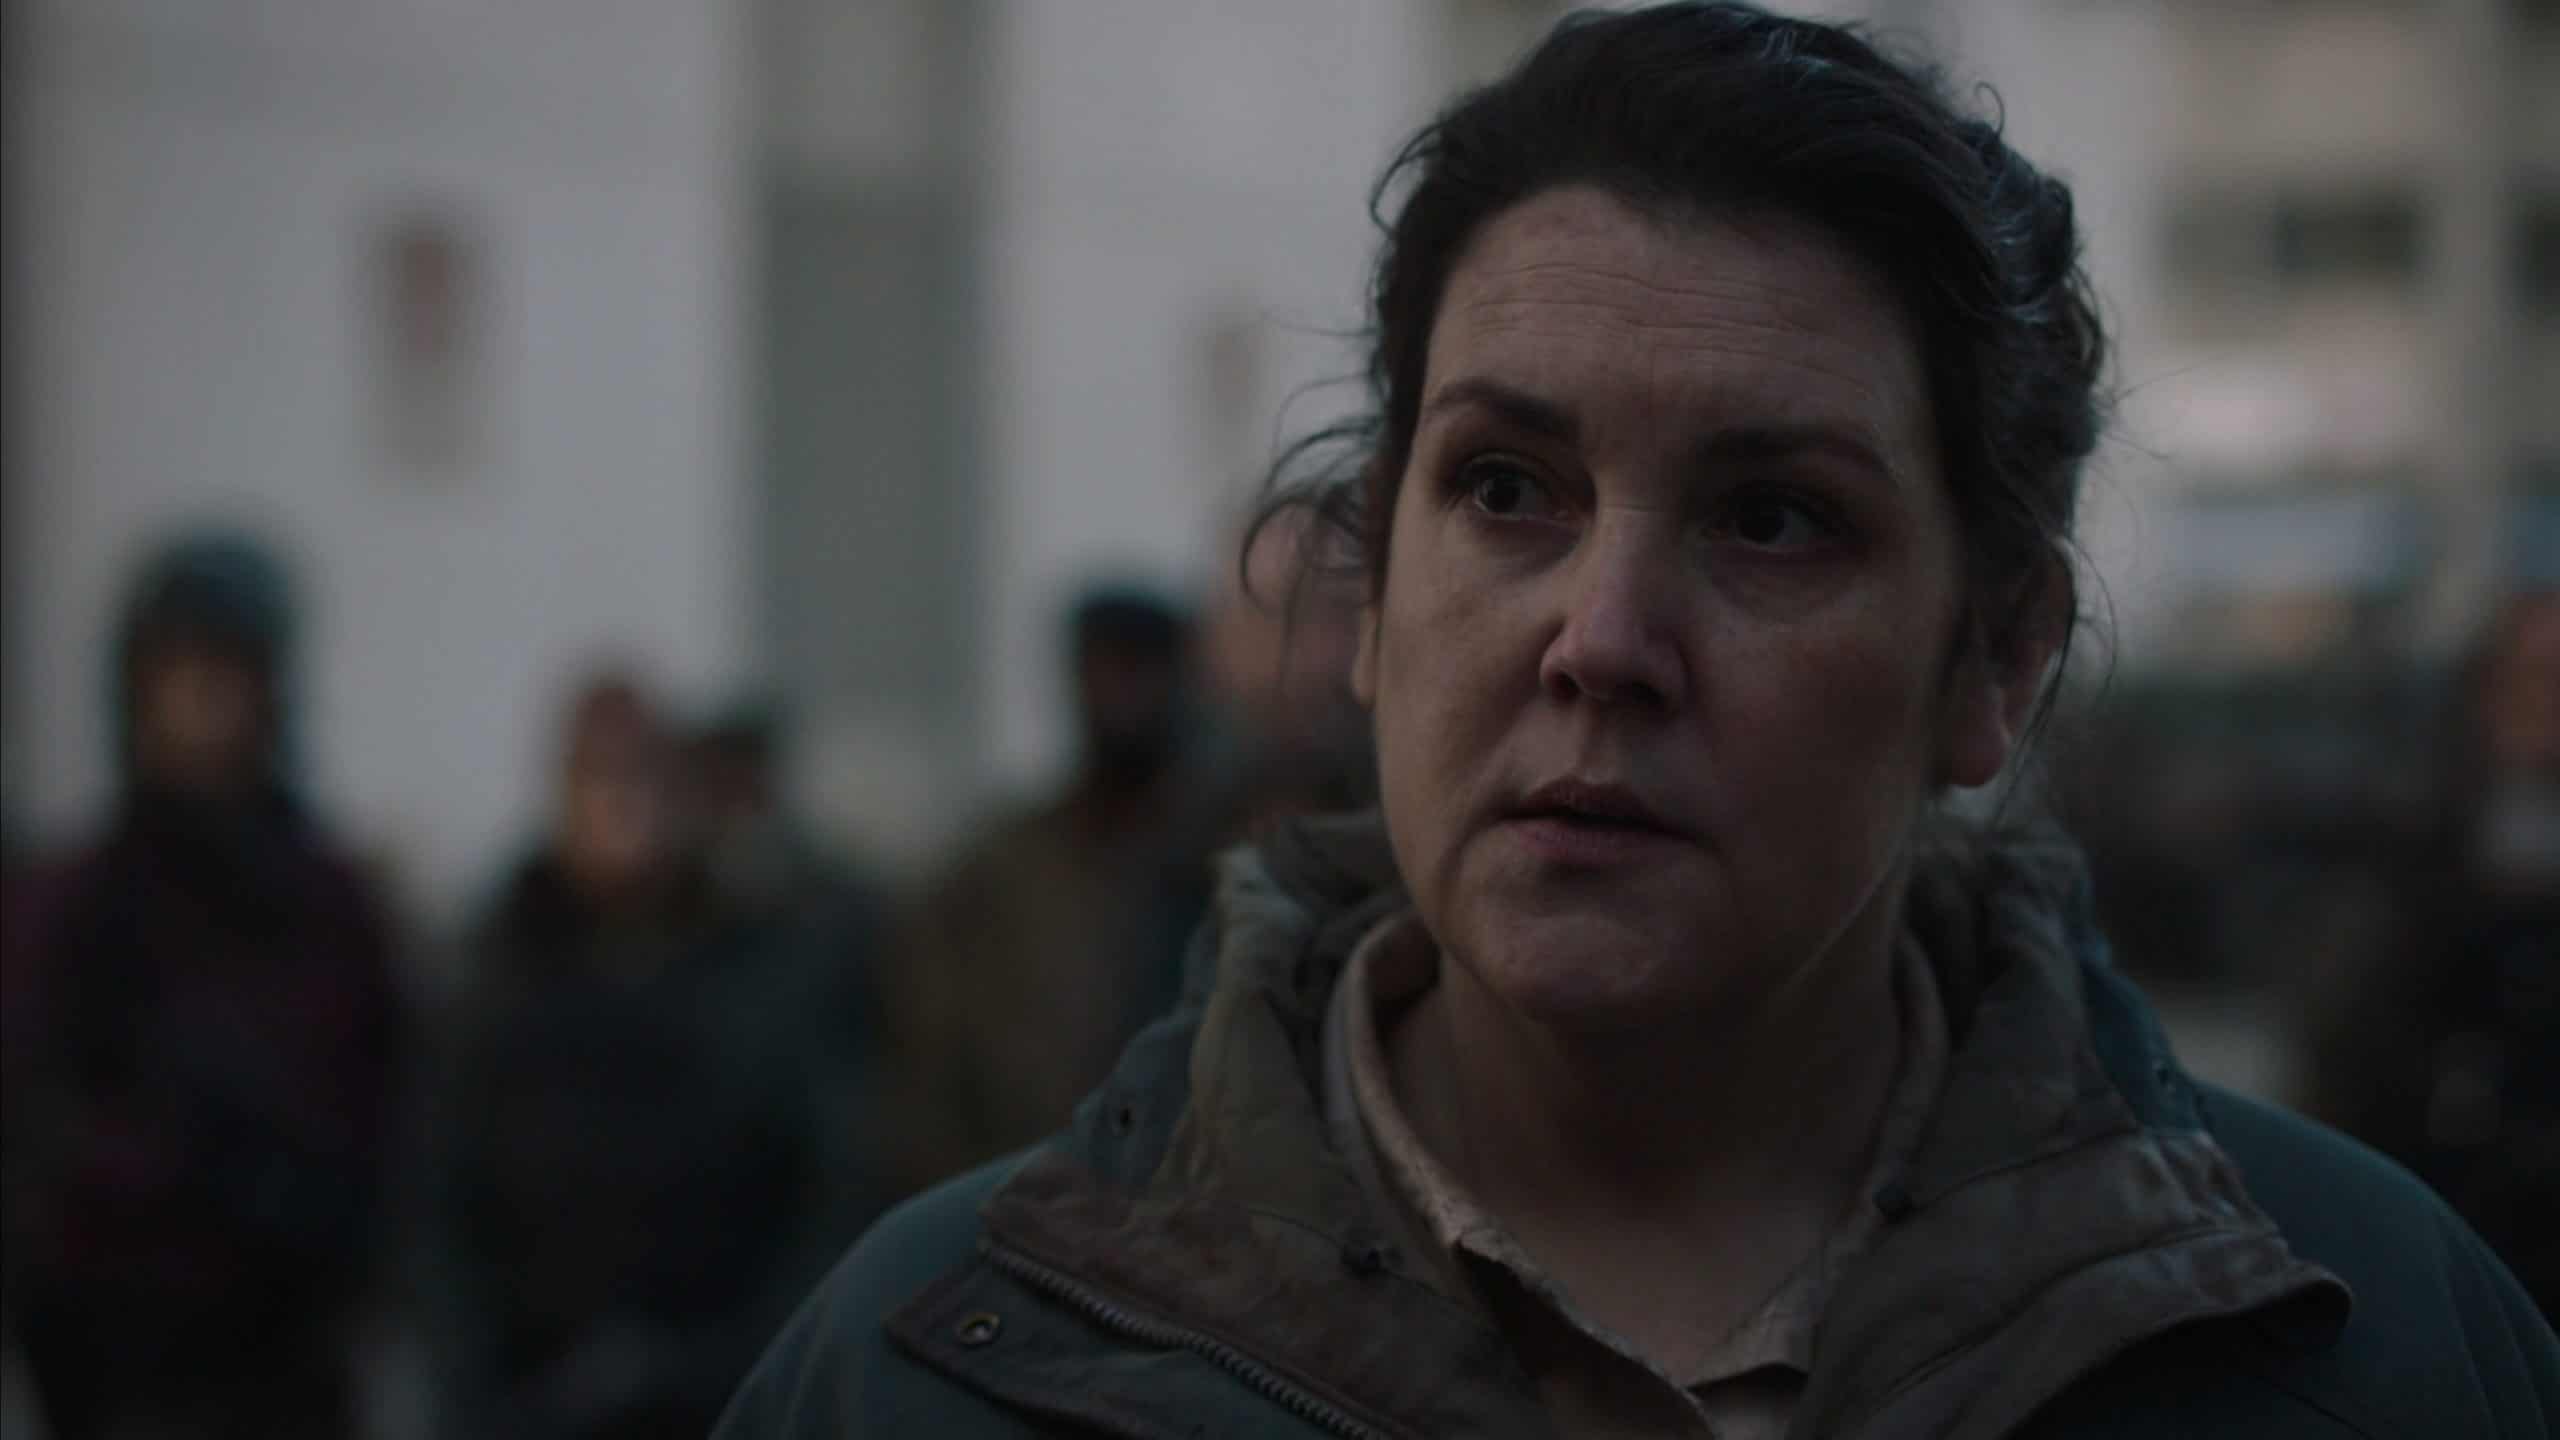 Melanie Lynskey as Kathleen giving directions to her rebels about finding Henry